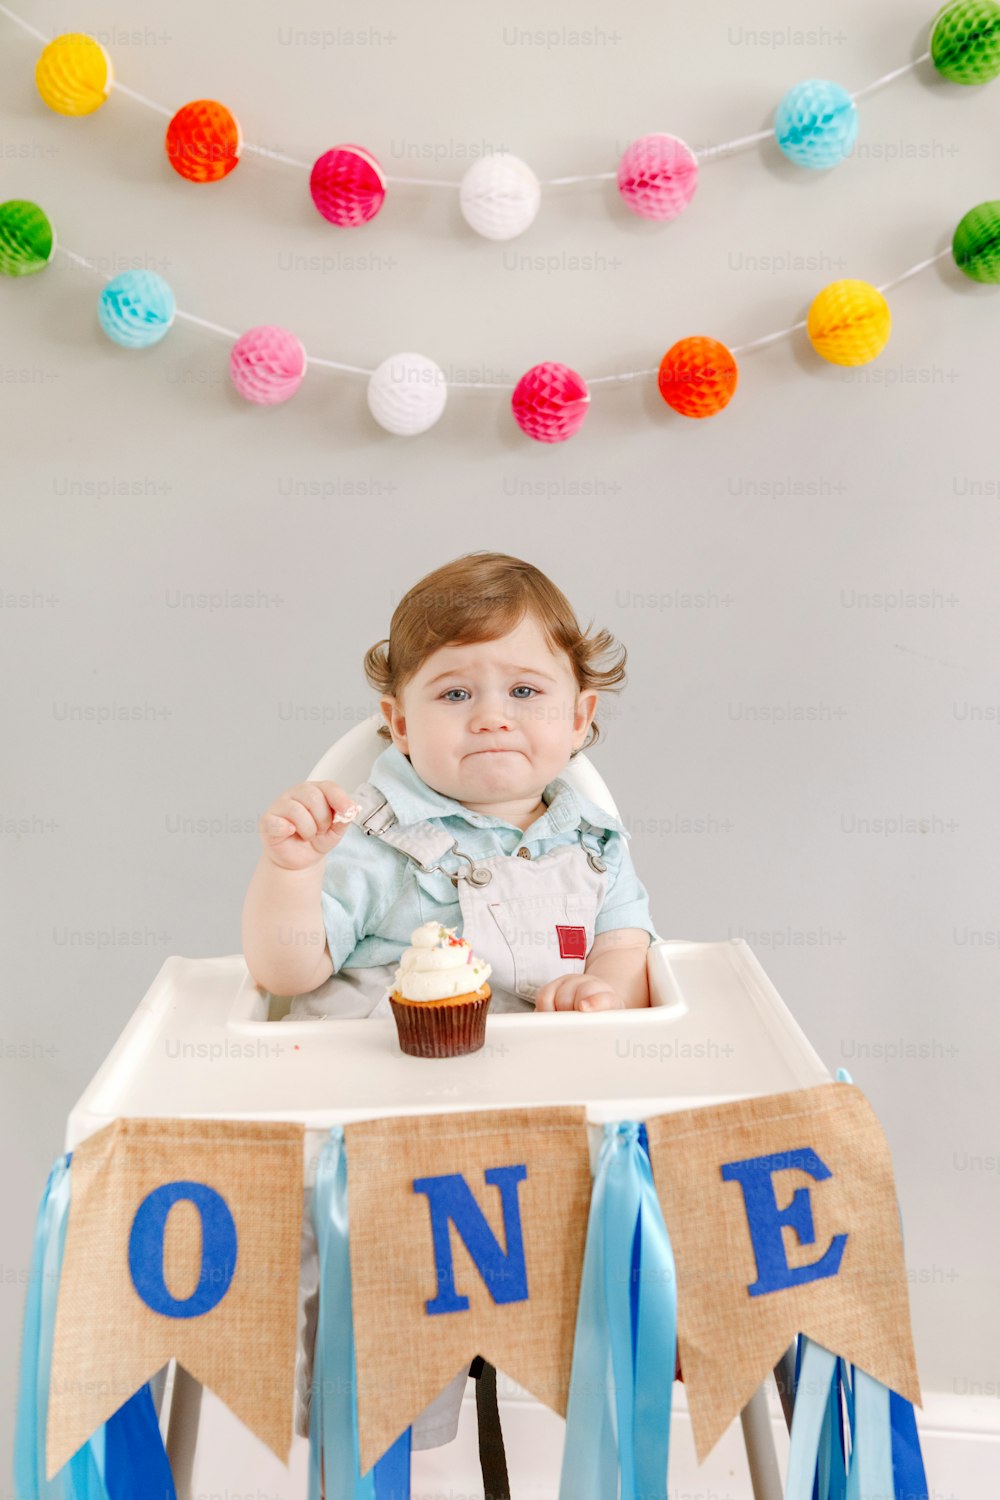 Cute adorable sad upset Caucasian baby boy celebrating his first birthday at home. Pensive child kid toddler sitting in high chair table eating tasty cupcake dessert. Happy birthday lifestyle concept.